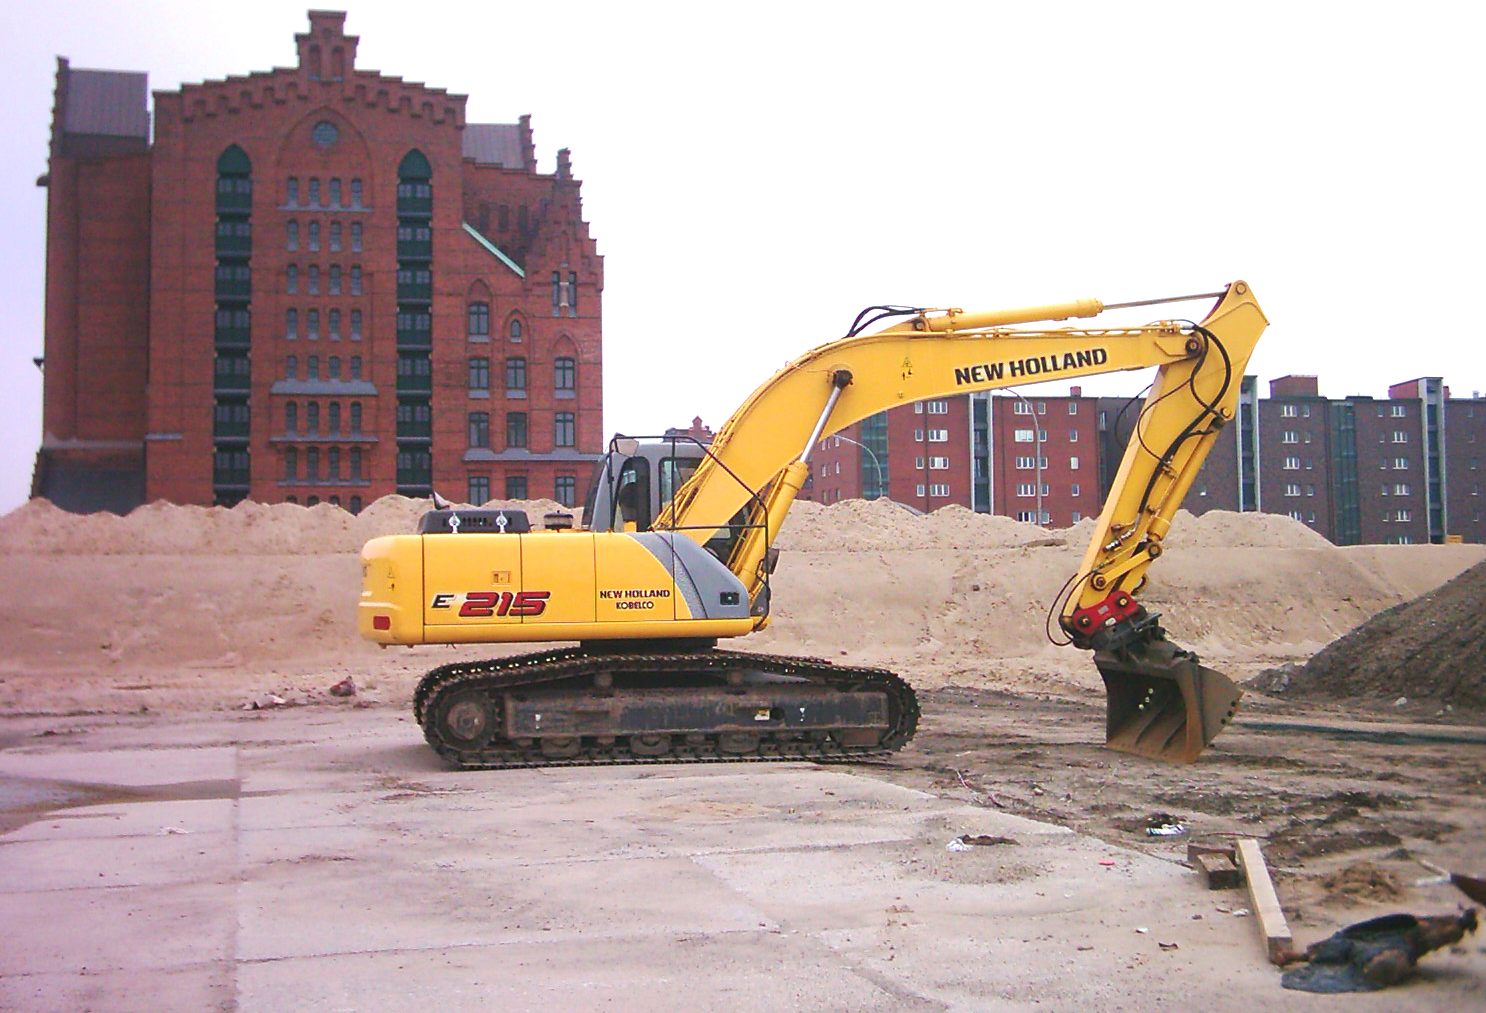 Image of New Holland Construction Machinery at a construction site